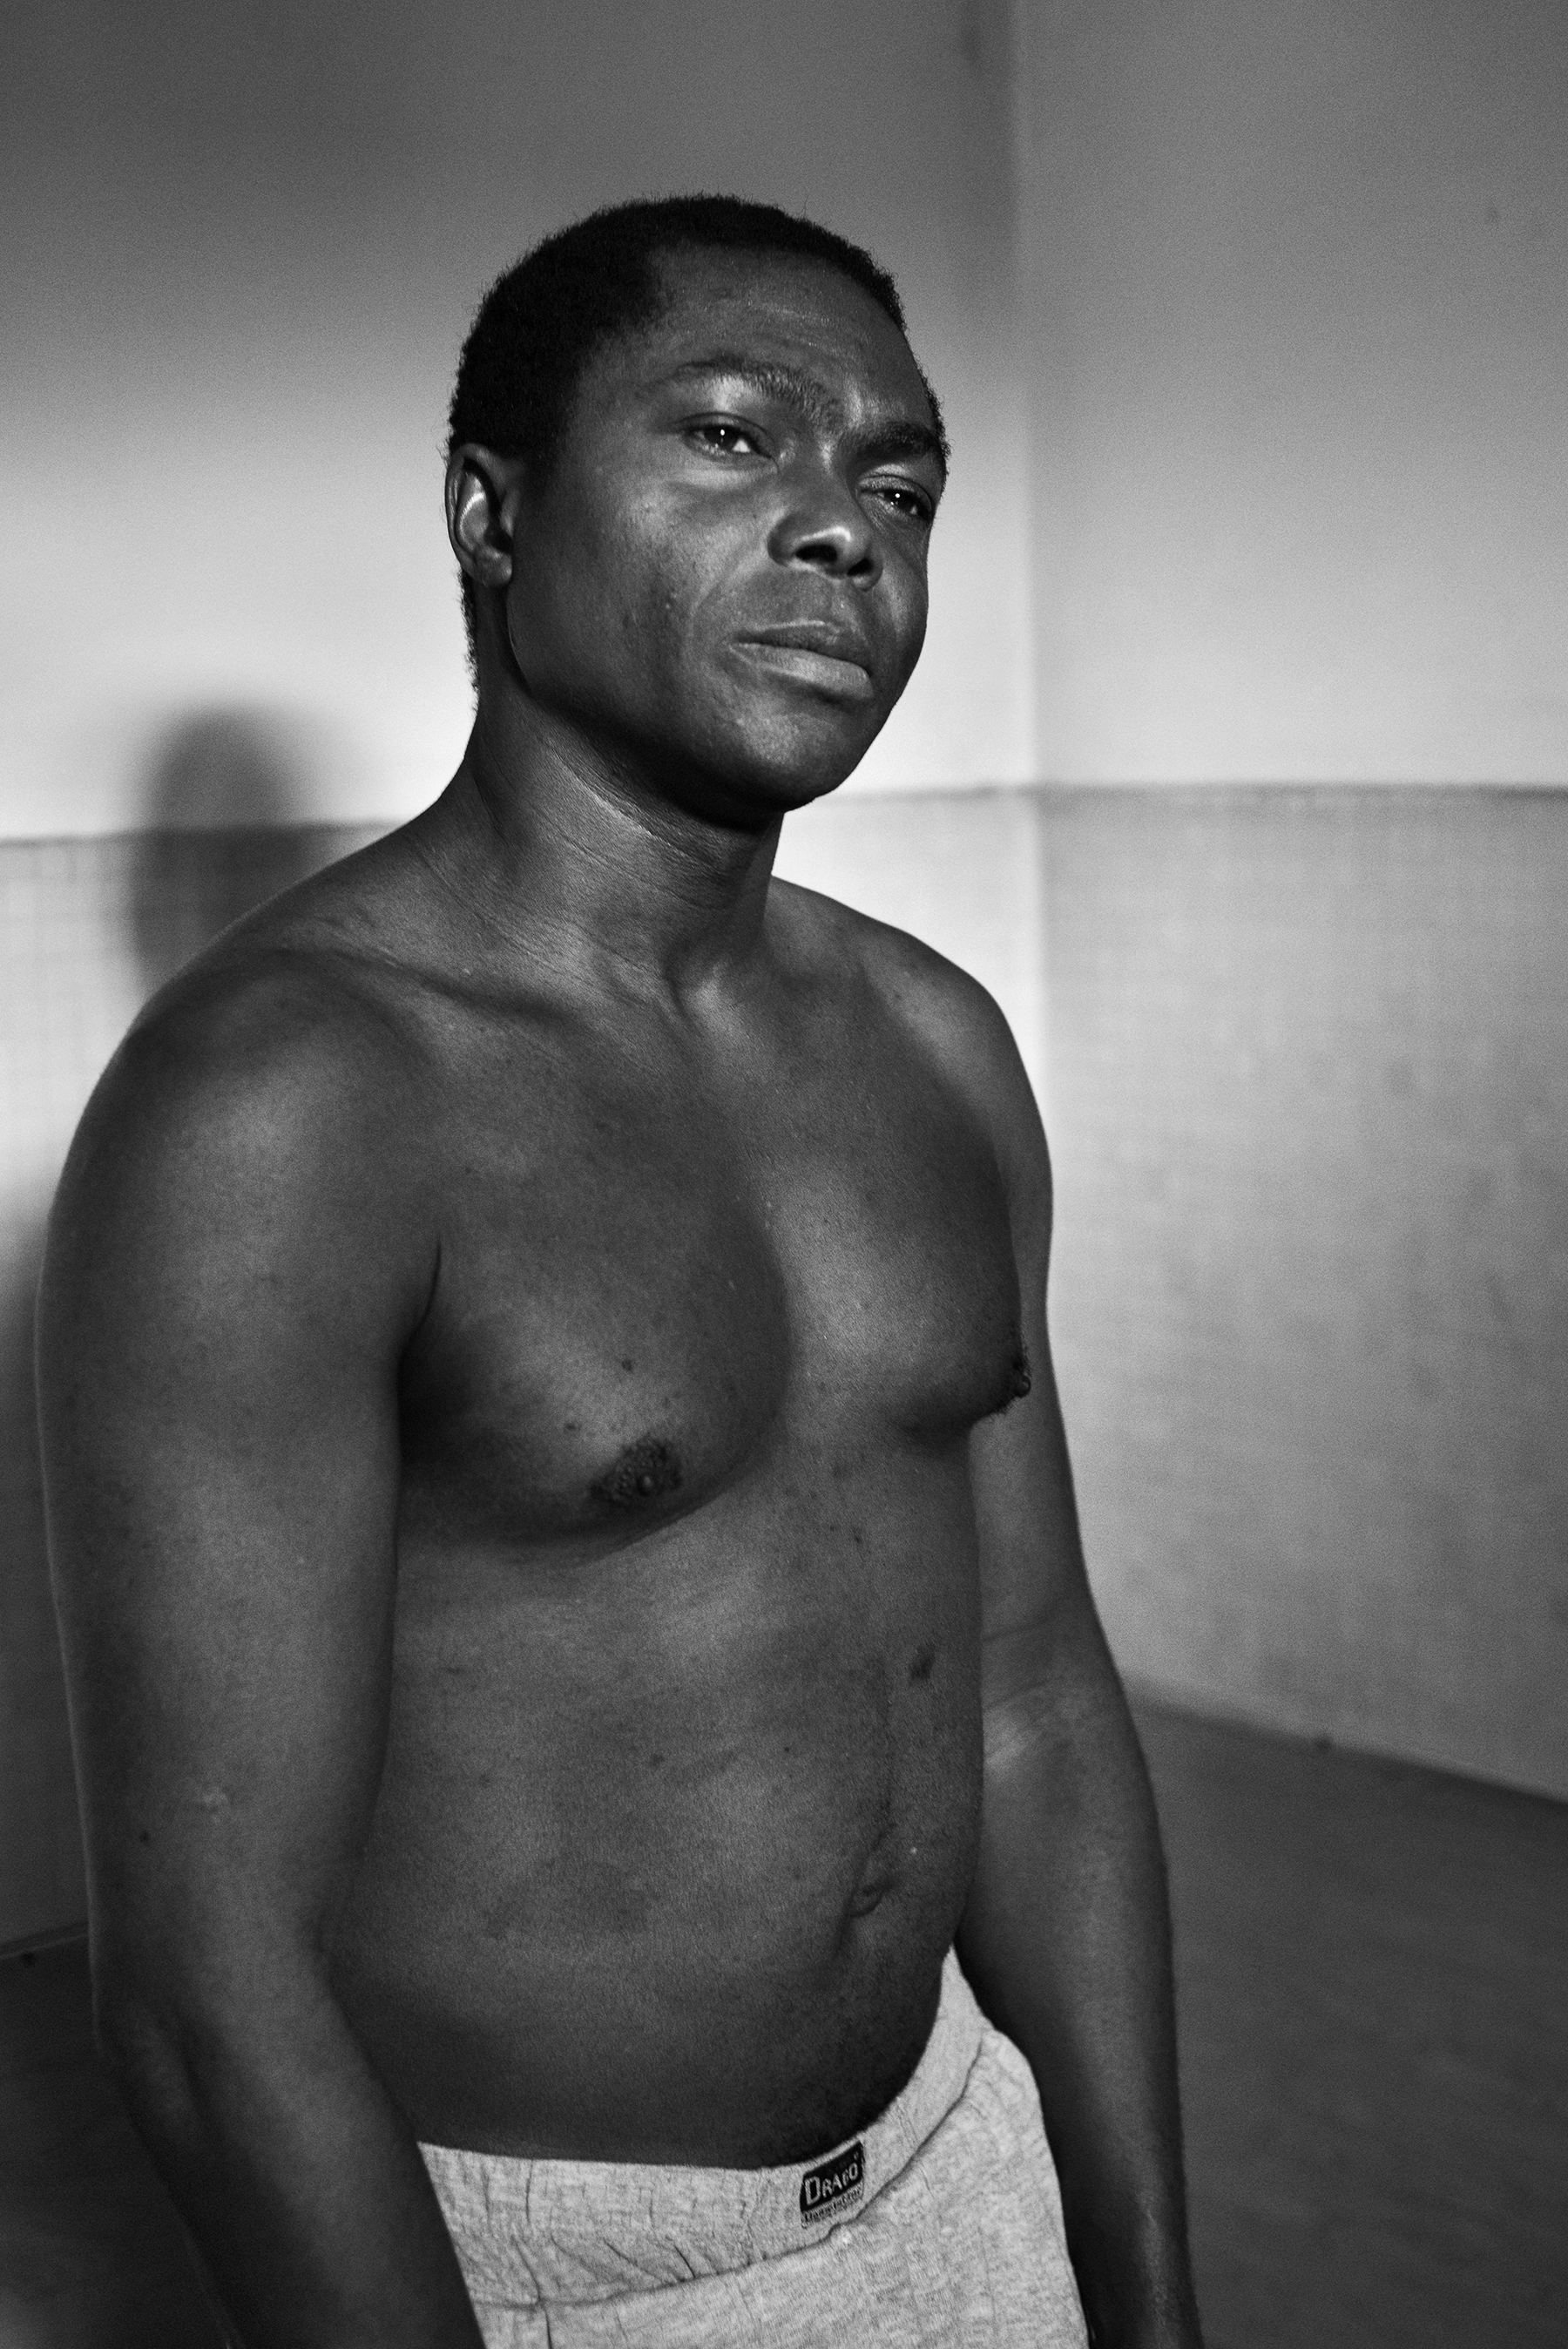  Rok Ibe (30) in the showers� entrance inside the Public Baths of Via Bianz� in Turin, Italy; December 2018.
Mr. Ibe lives with his parents on the outskirt of Torino; given that they can�t afford to pay housing bills, they are forced to live without 